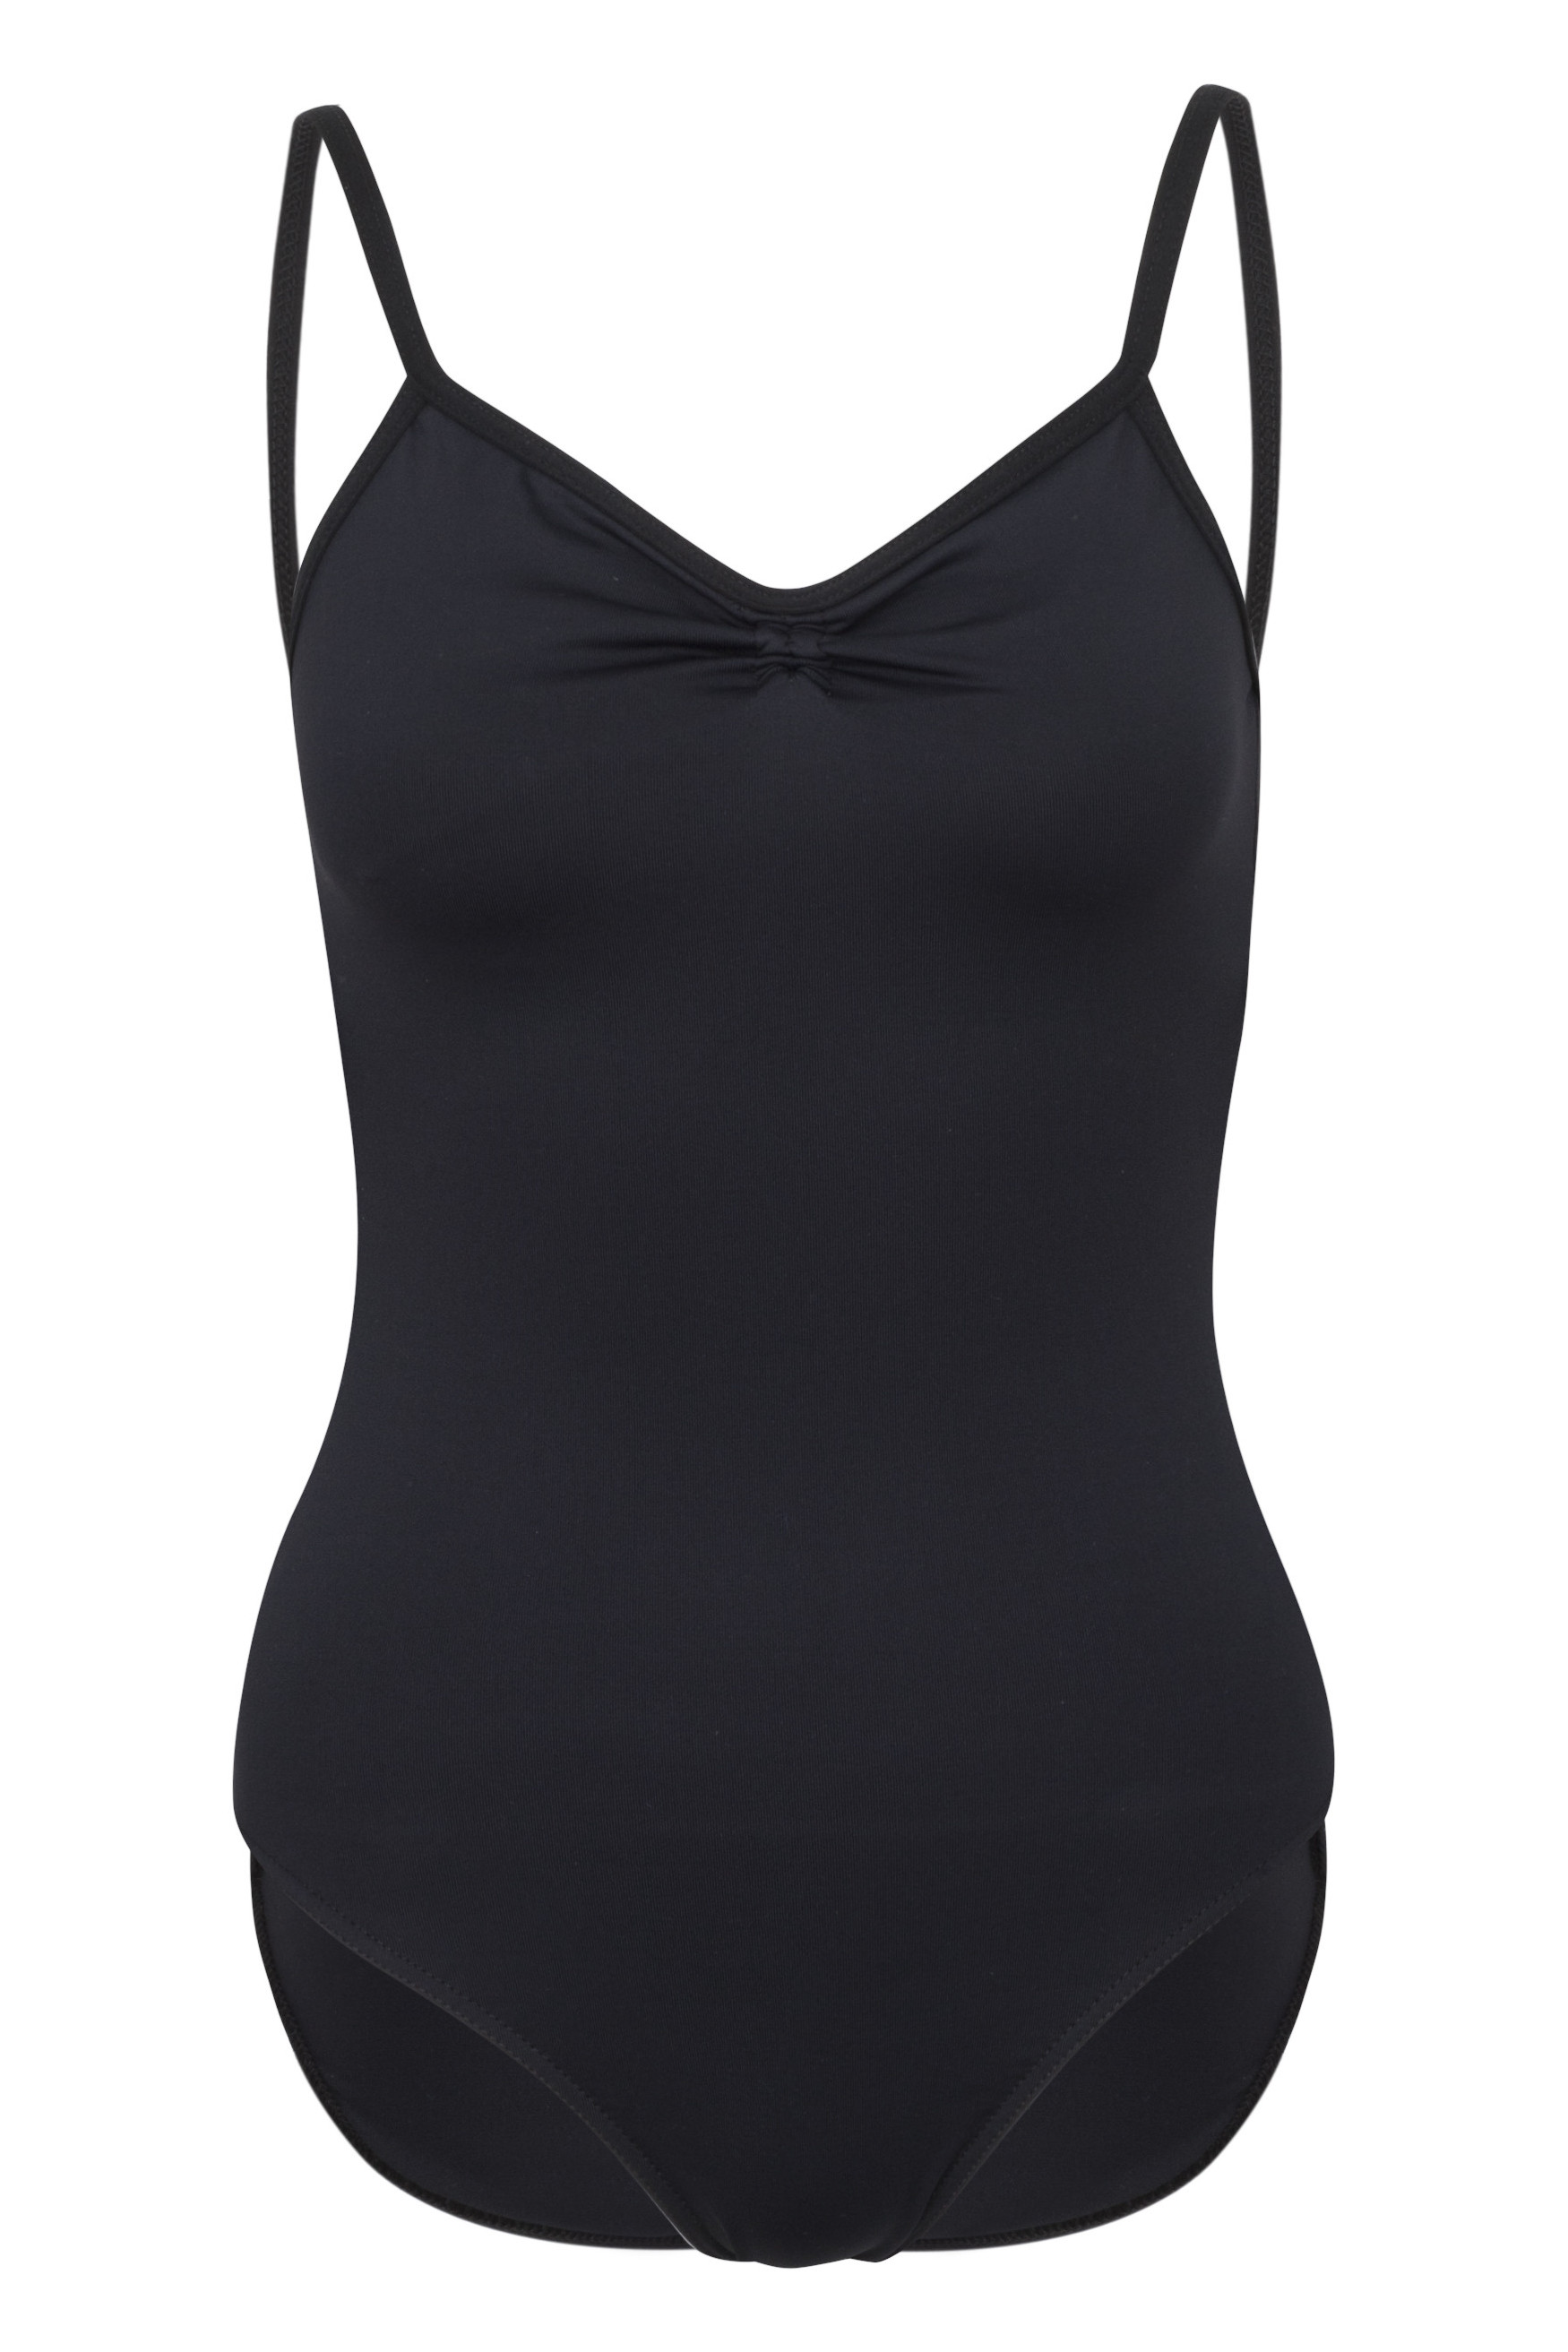 Freed Alice Camisole Leotard – Royal Academy of Dance